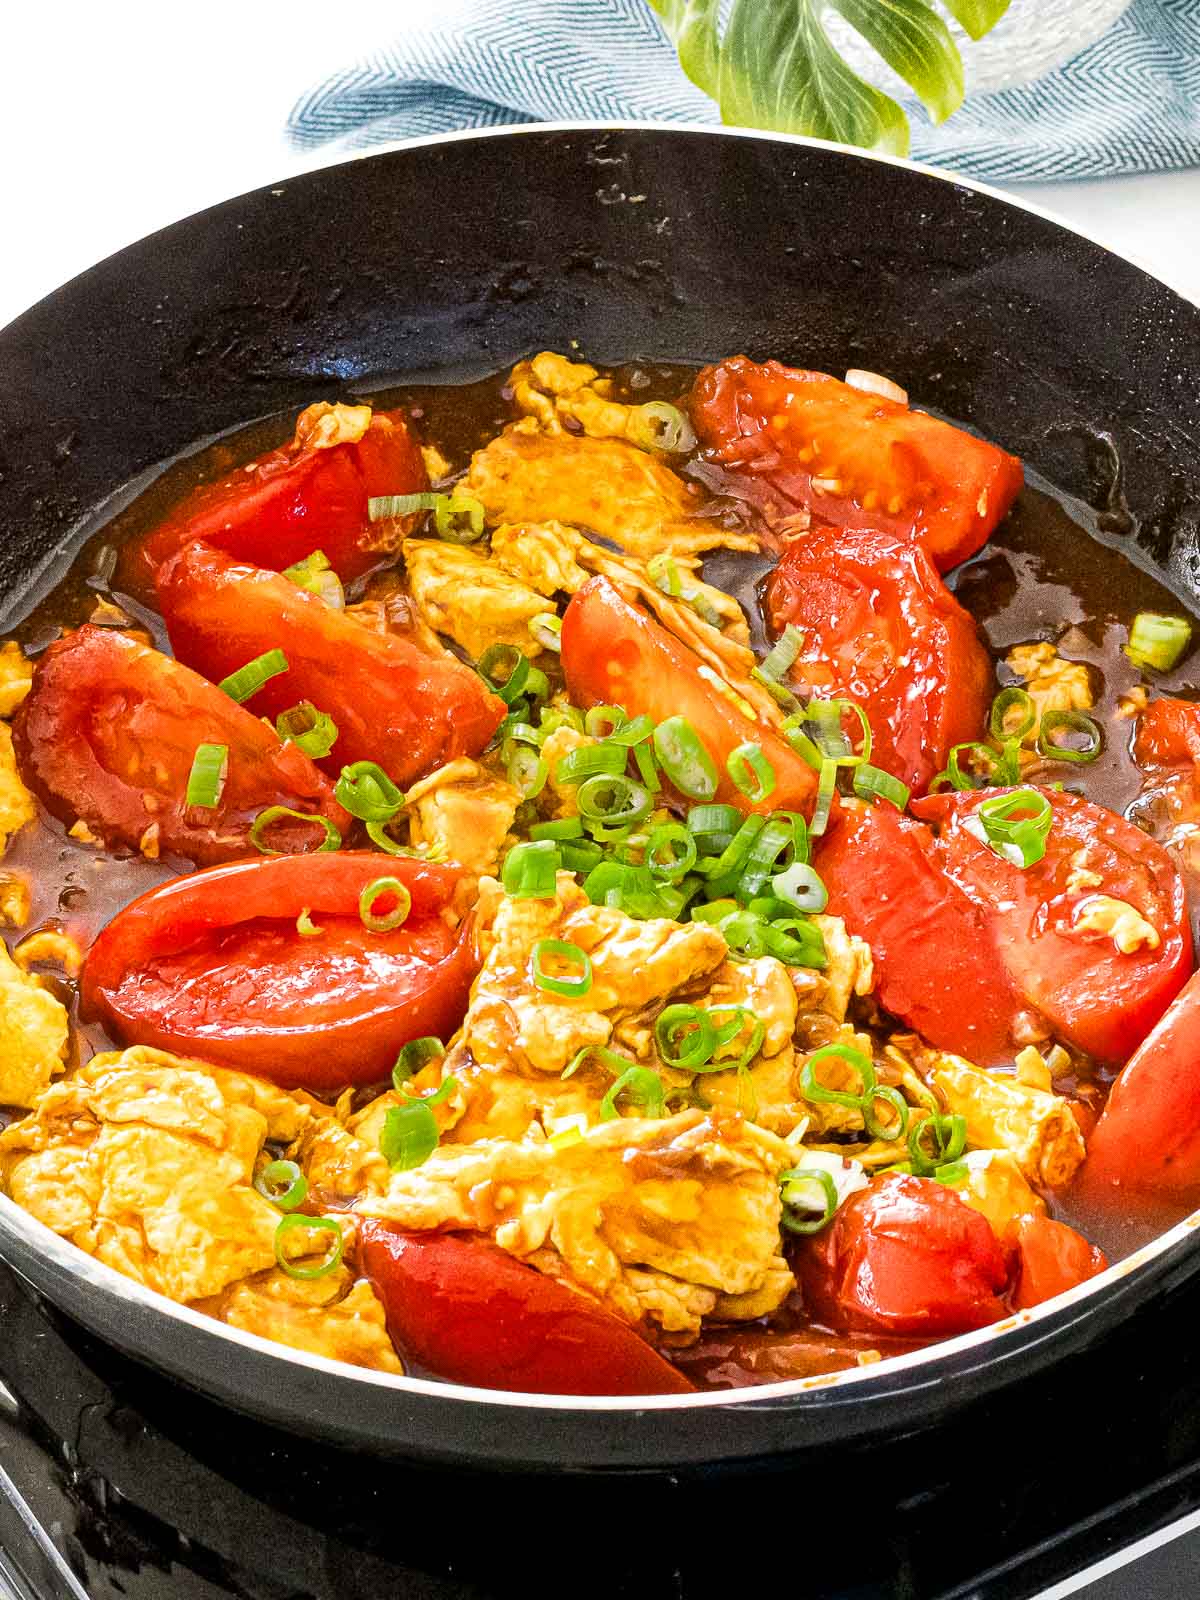 Chinese tomato egg stir fry in a pan with juicy red tomatoes and scrambled eggs with green onions.